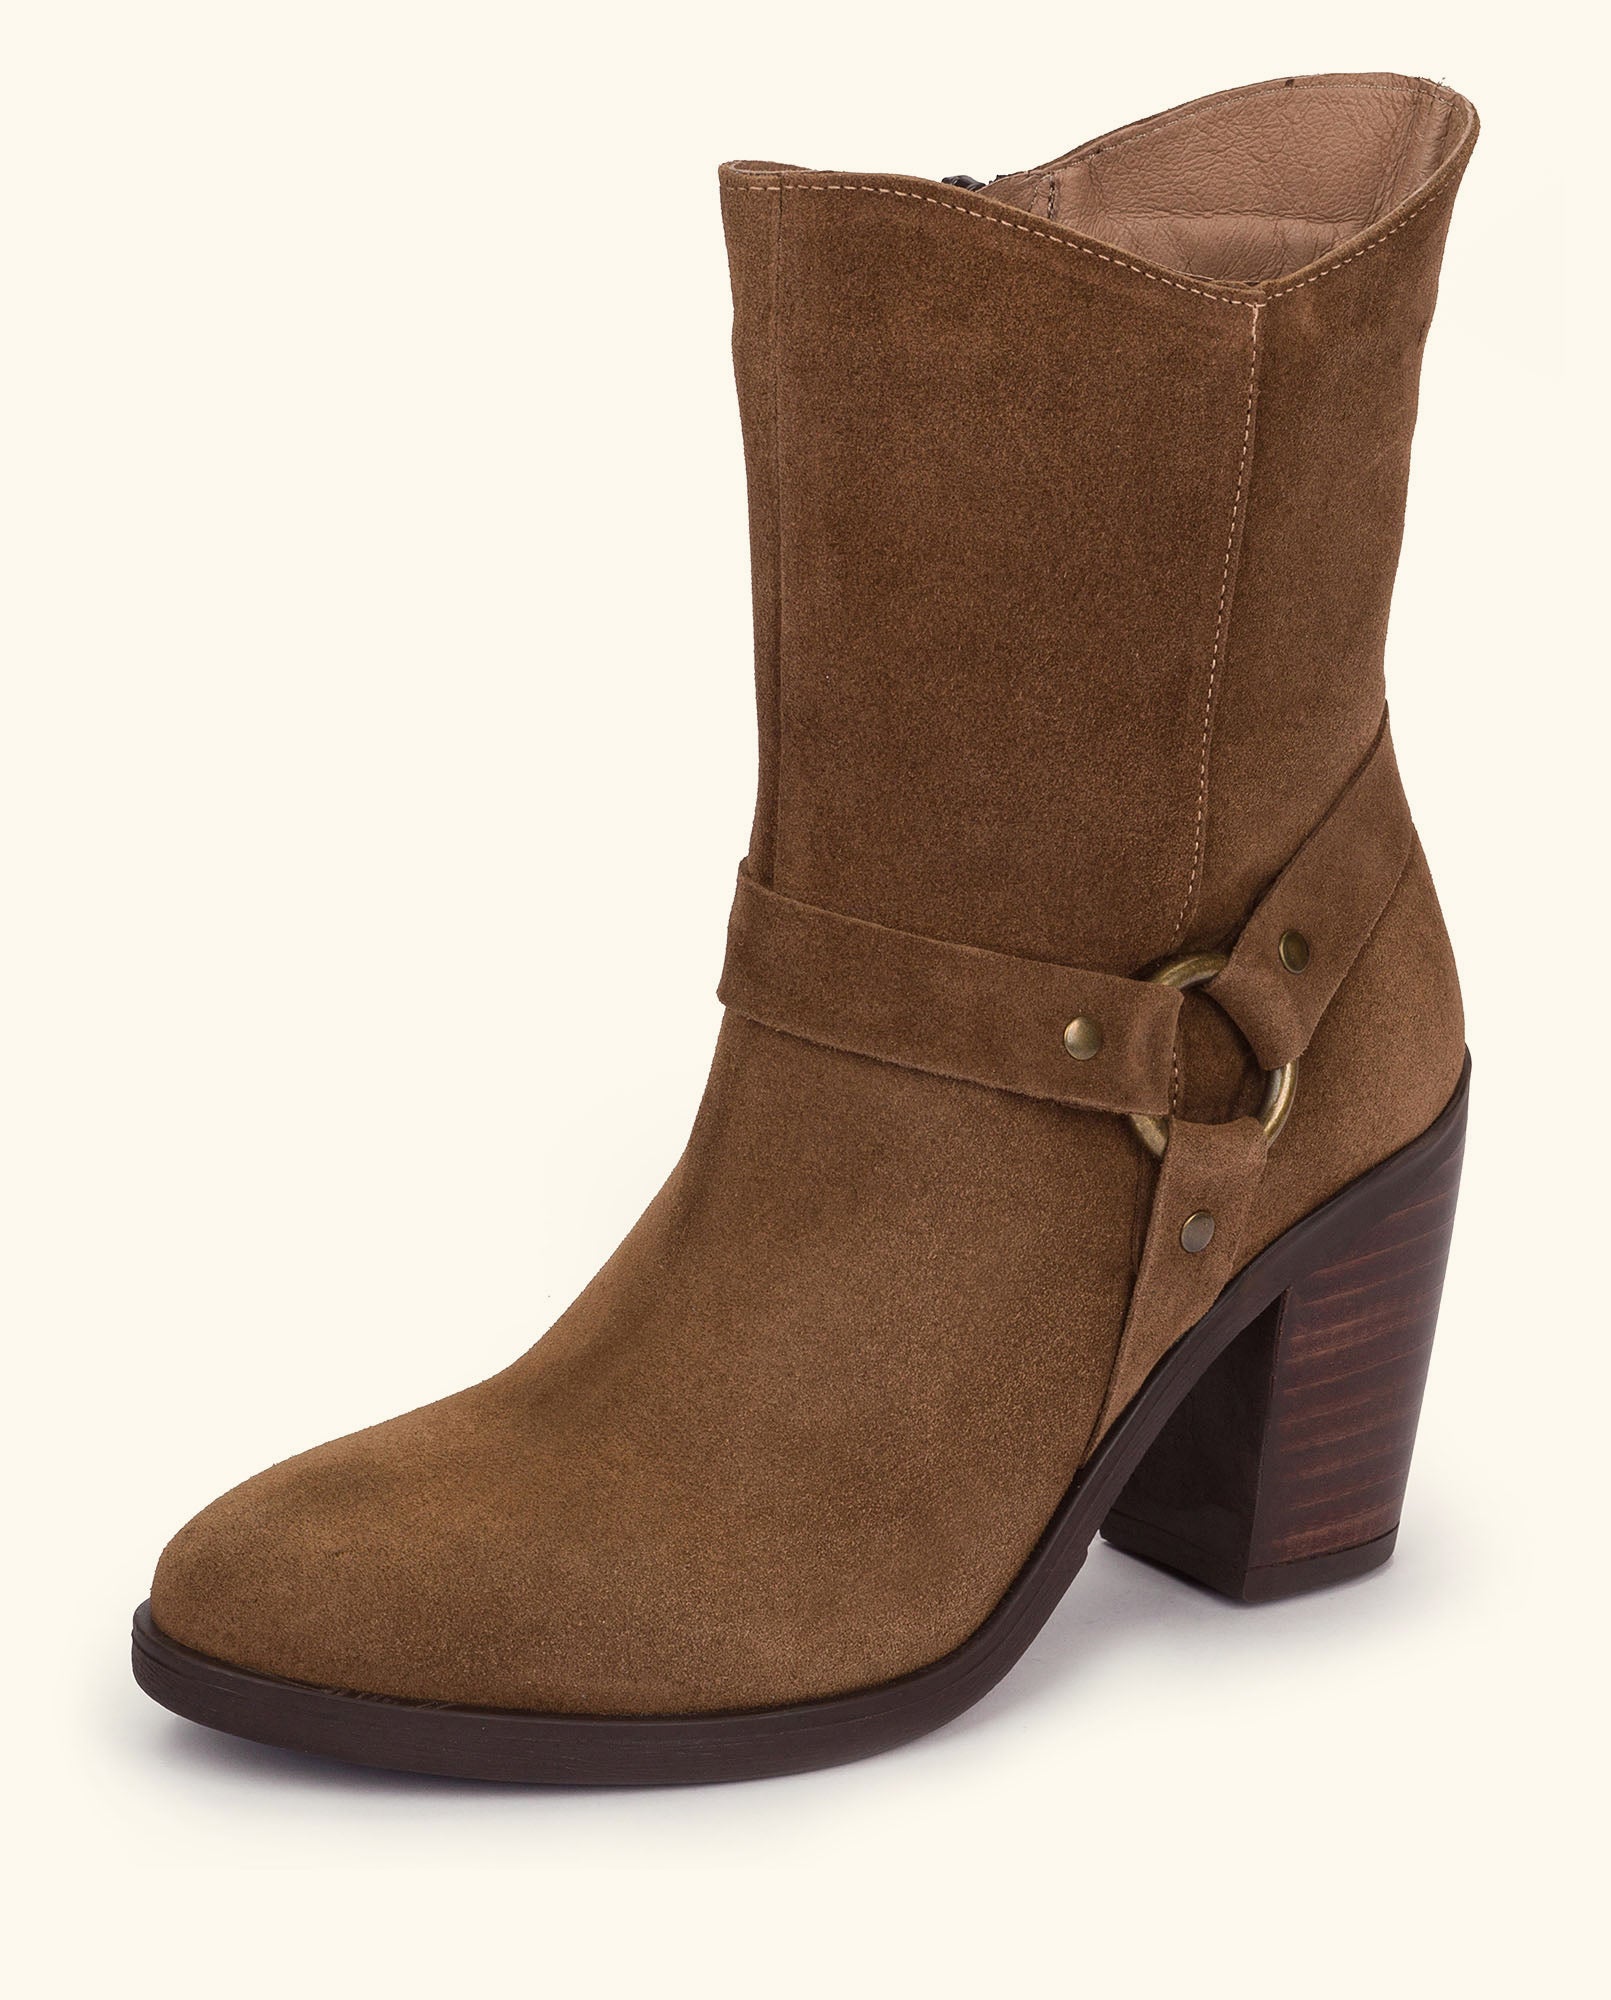 Heeled ankle boot TOURS-008 brown